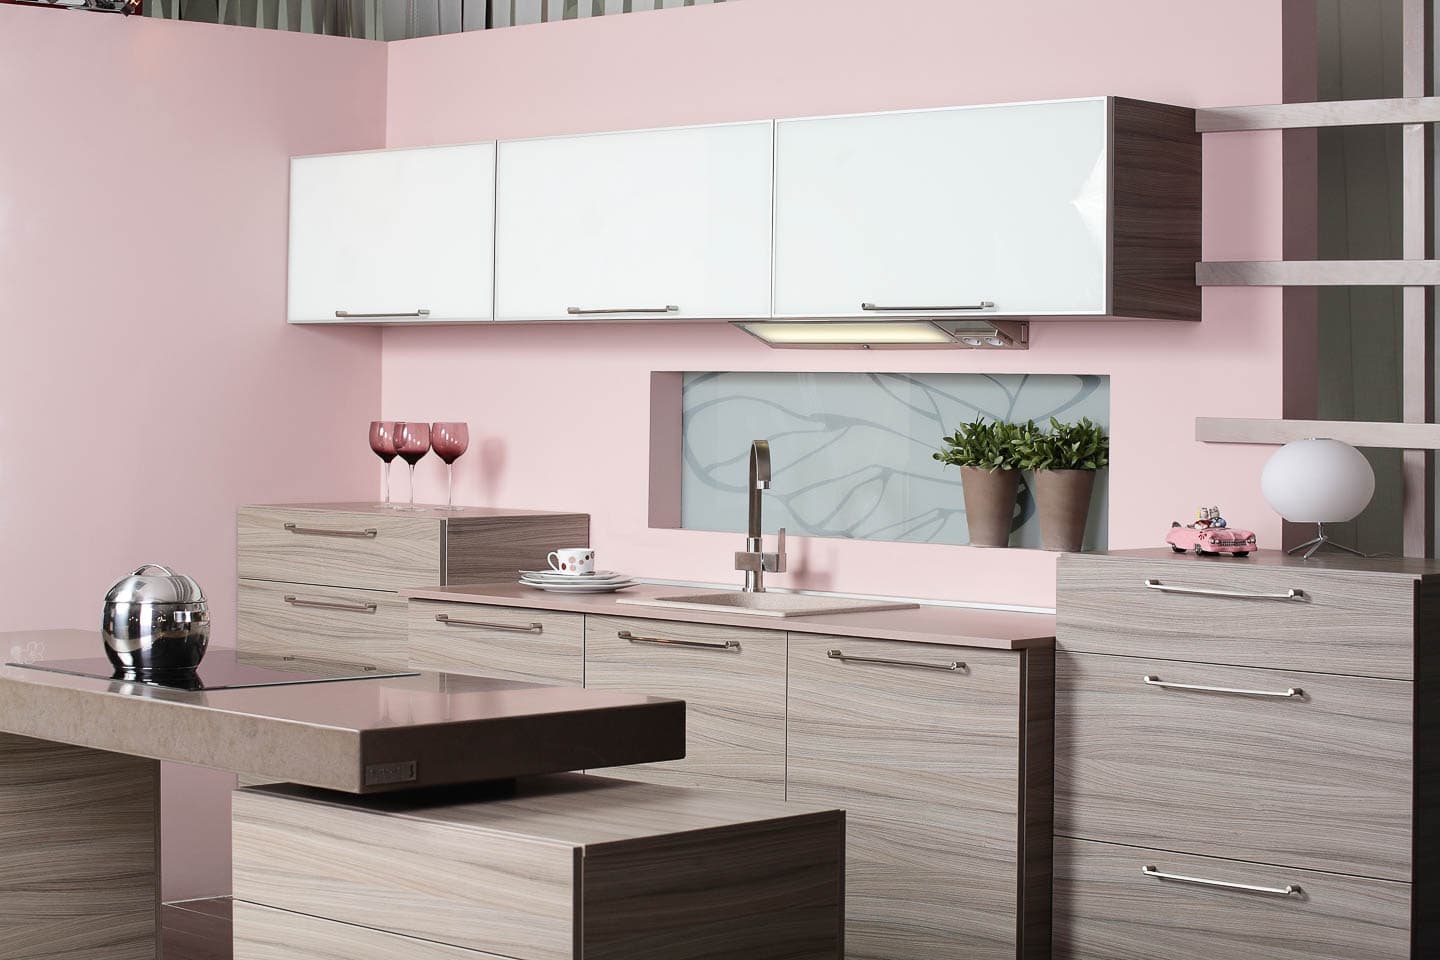 Modern kitchen with gray base cabinets, white upper cabinets and blush pink walls